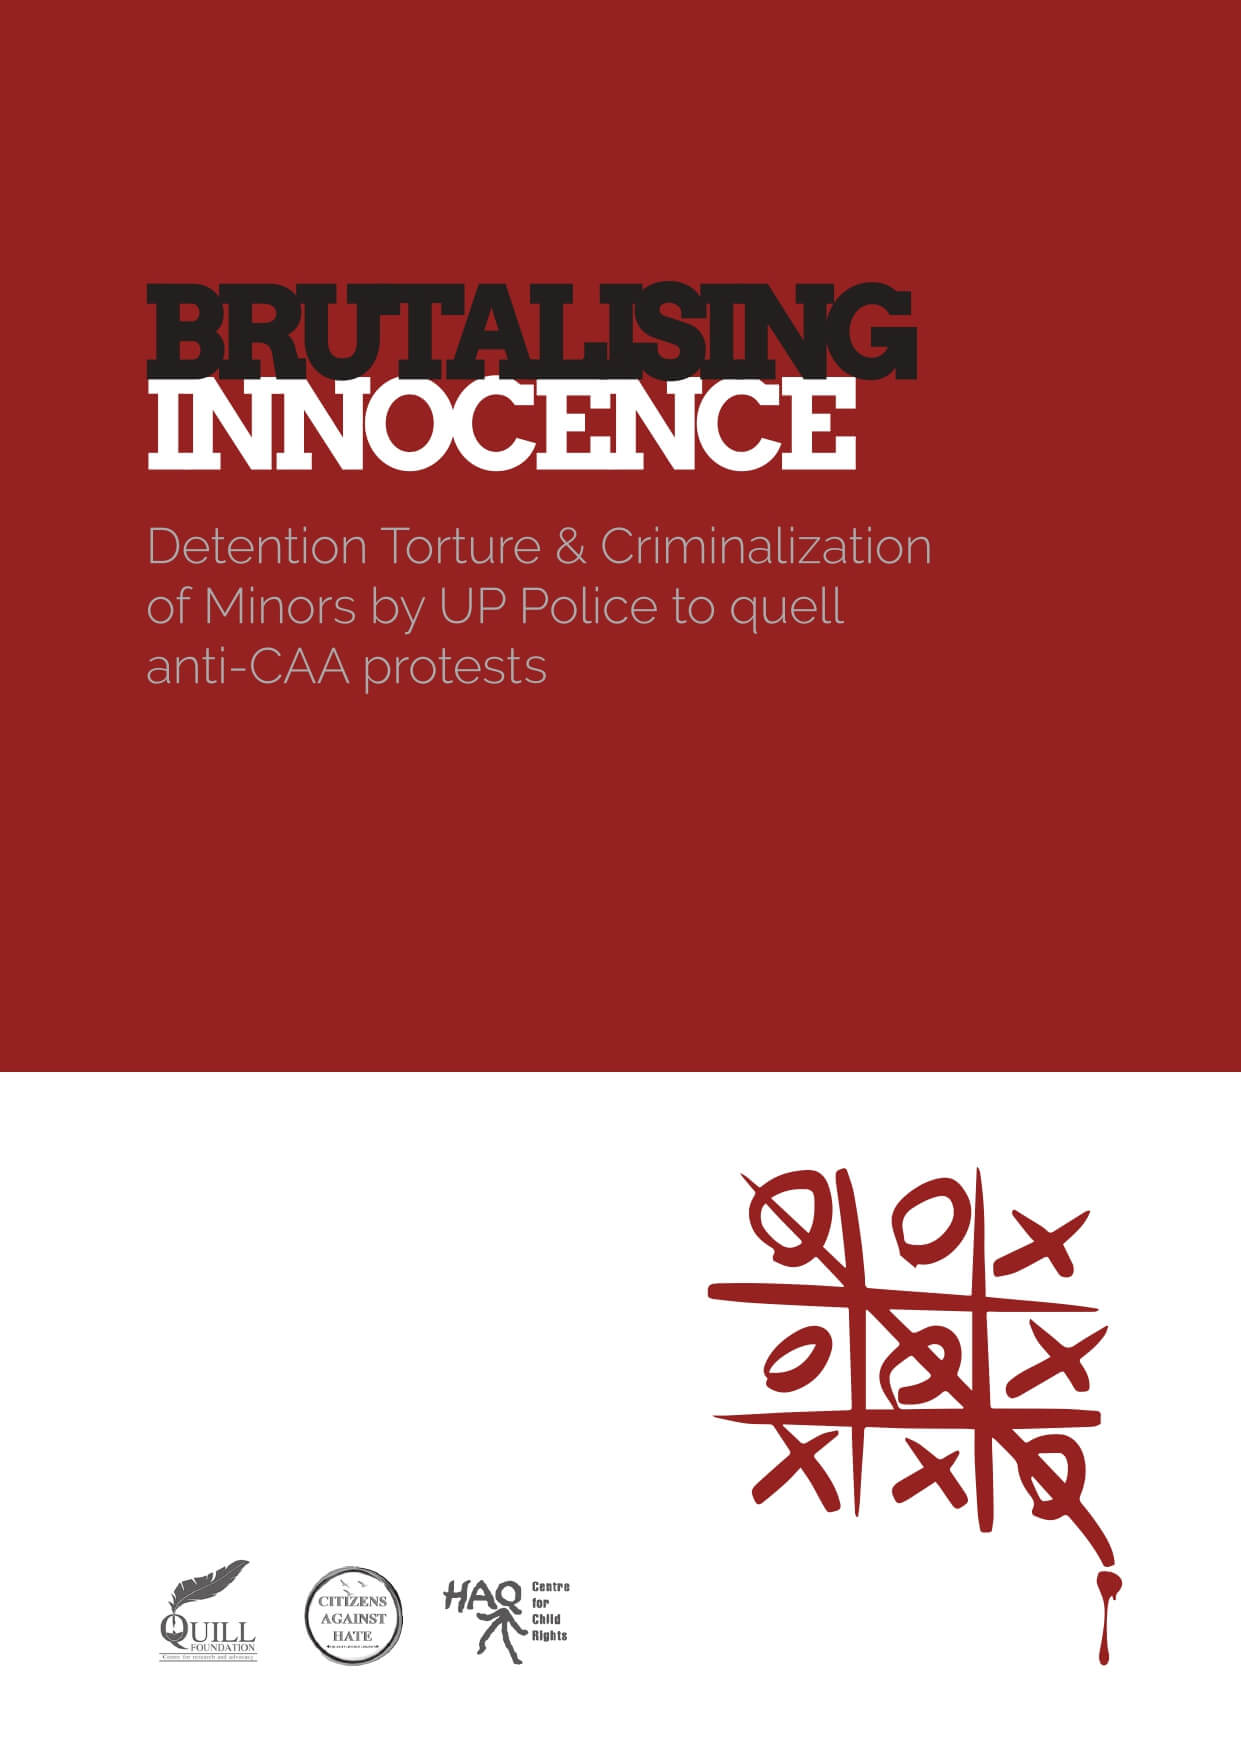 Brutalizing Innocence: Detention Torture & Criminalization of Minors by UP Police to Quell Anti-CAA Protests (Updated Report)